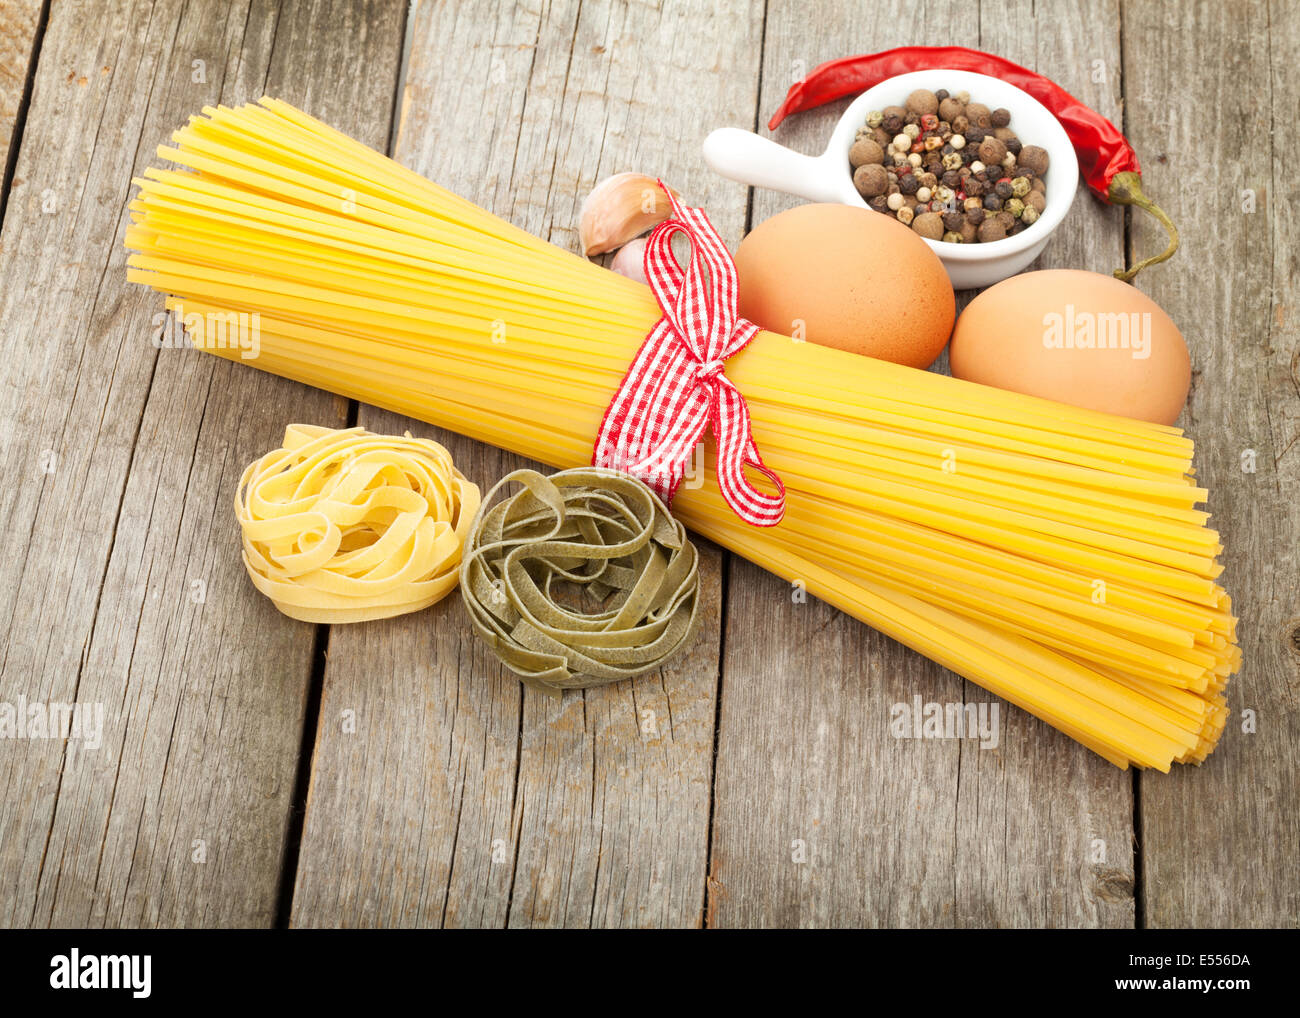 Pasta, eggs and spices on wooden table background Stock Photo